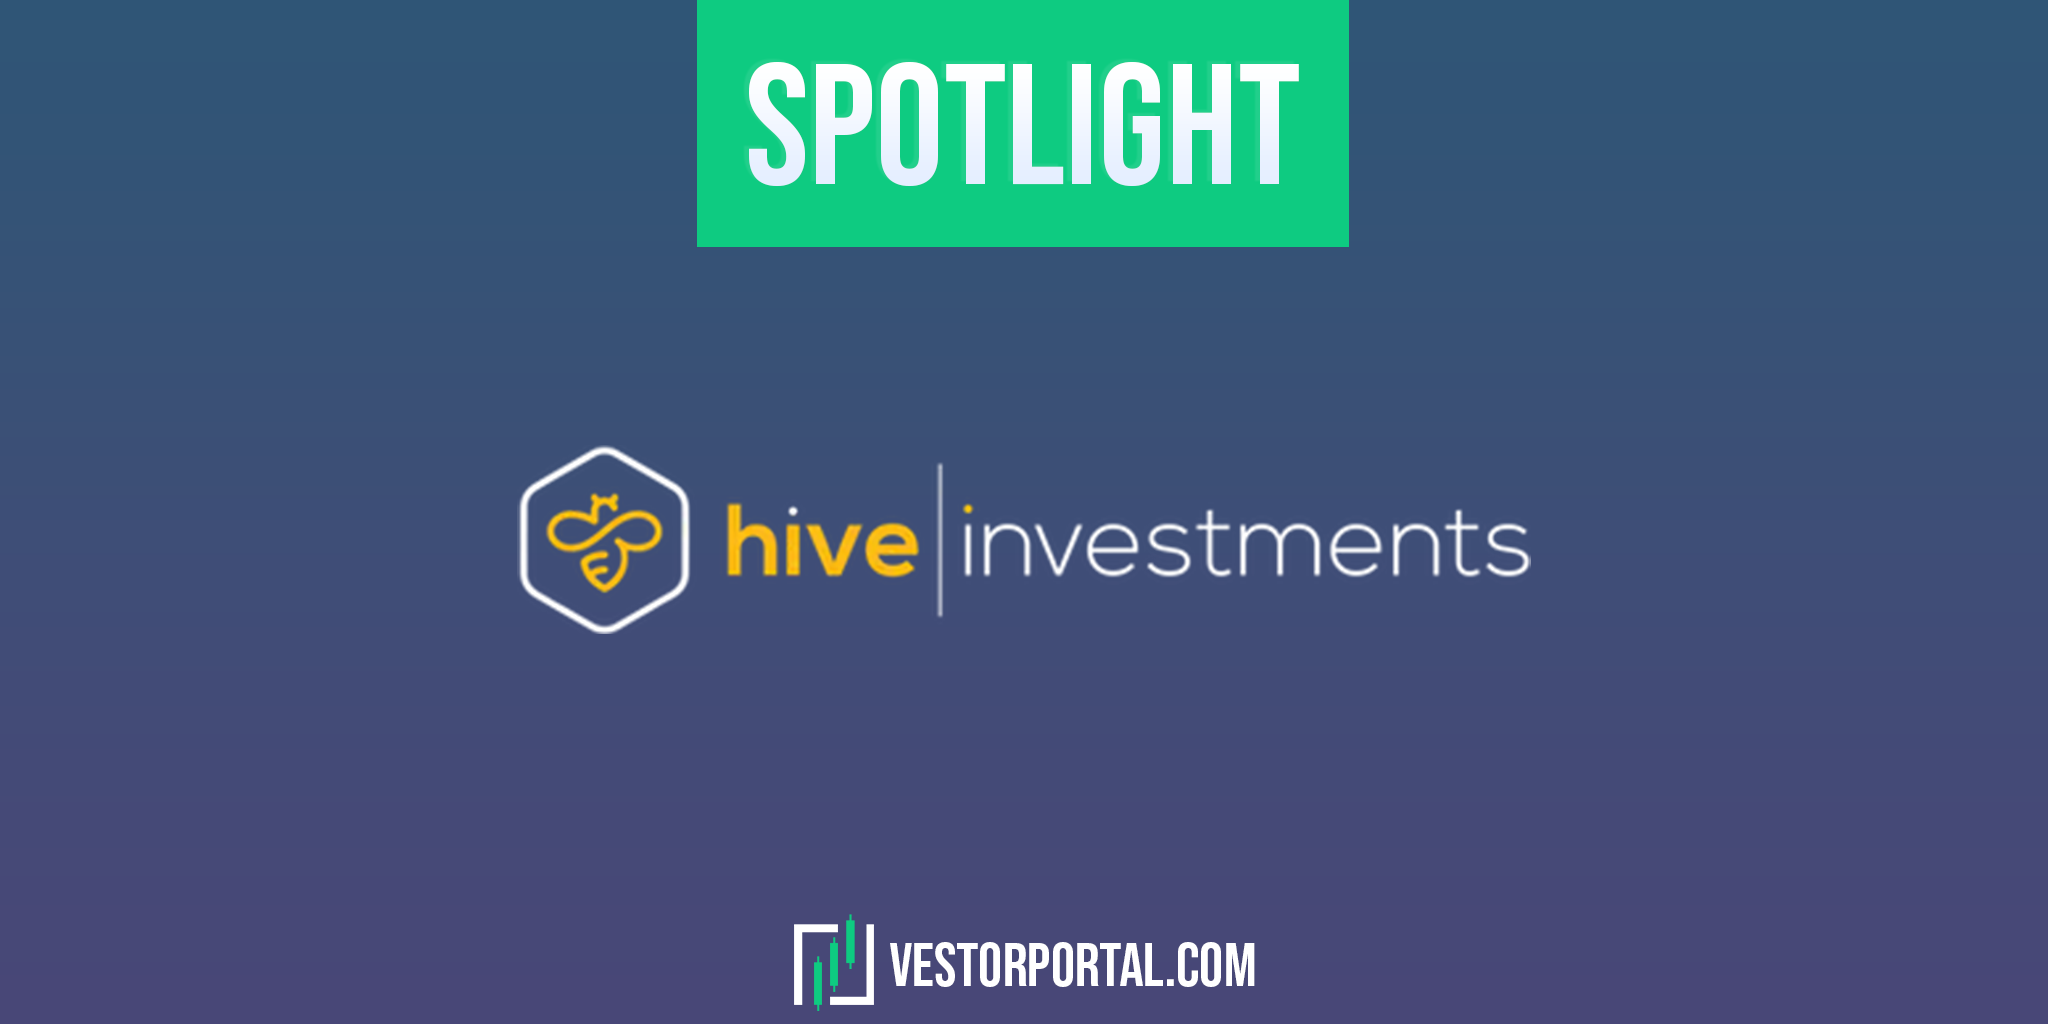 hive investments